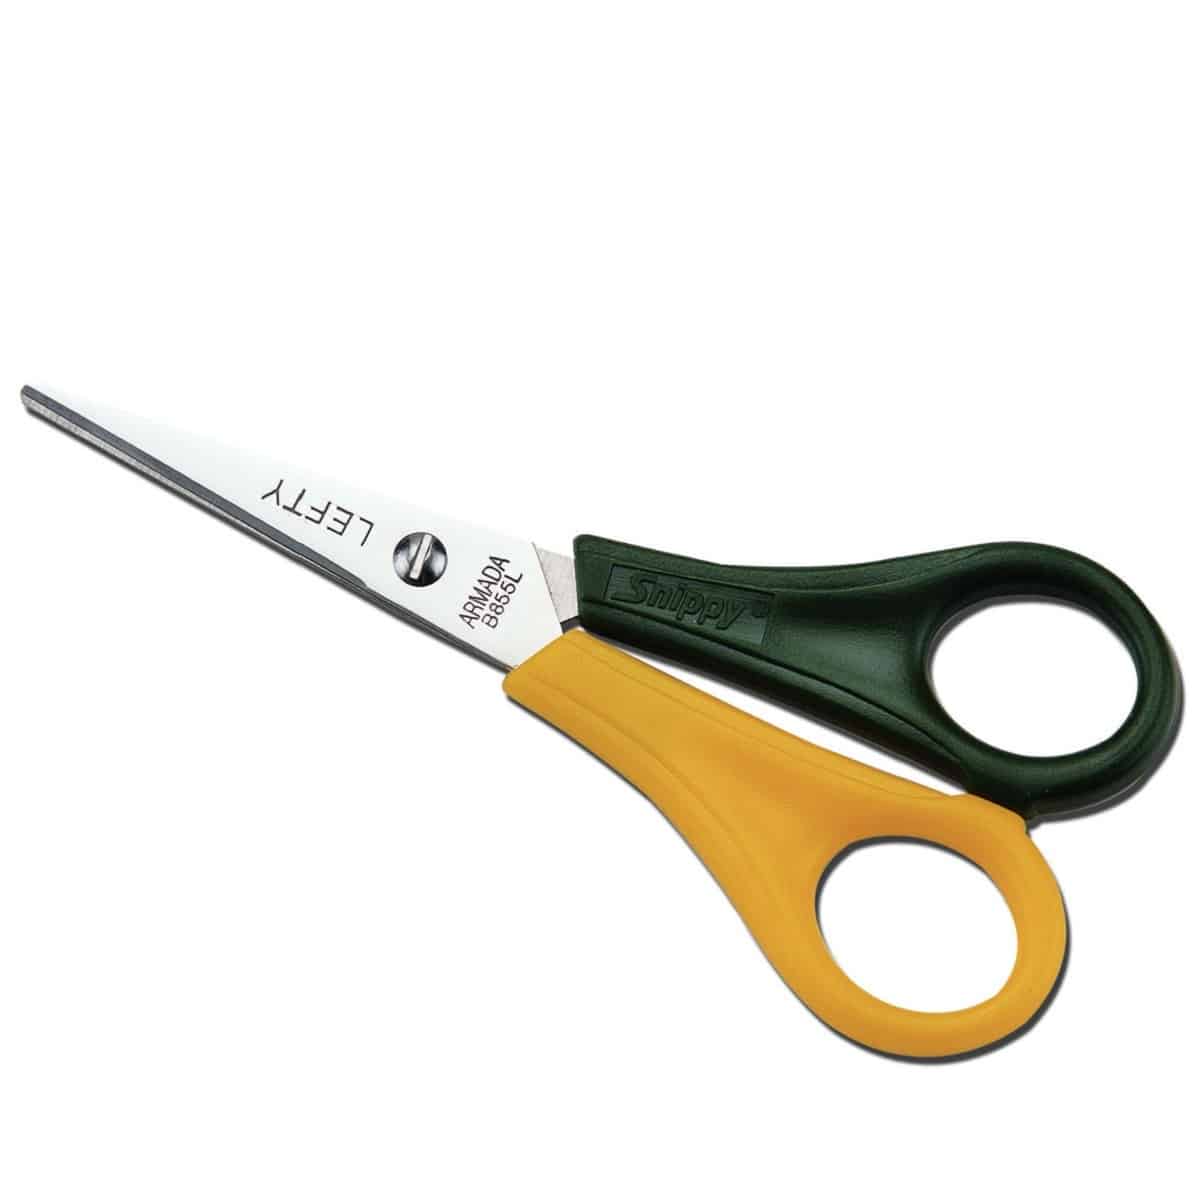 5″ Sharp Lefty Scissors  Craft and Classroom Supplies by Hygloss